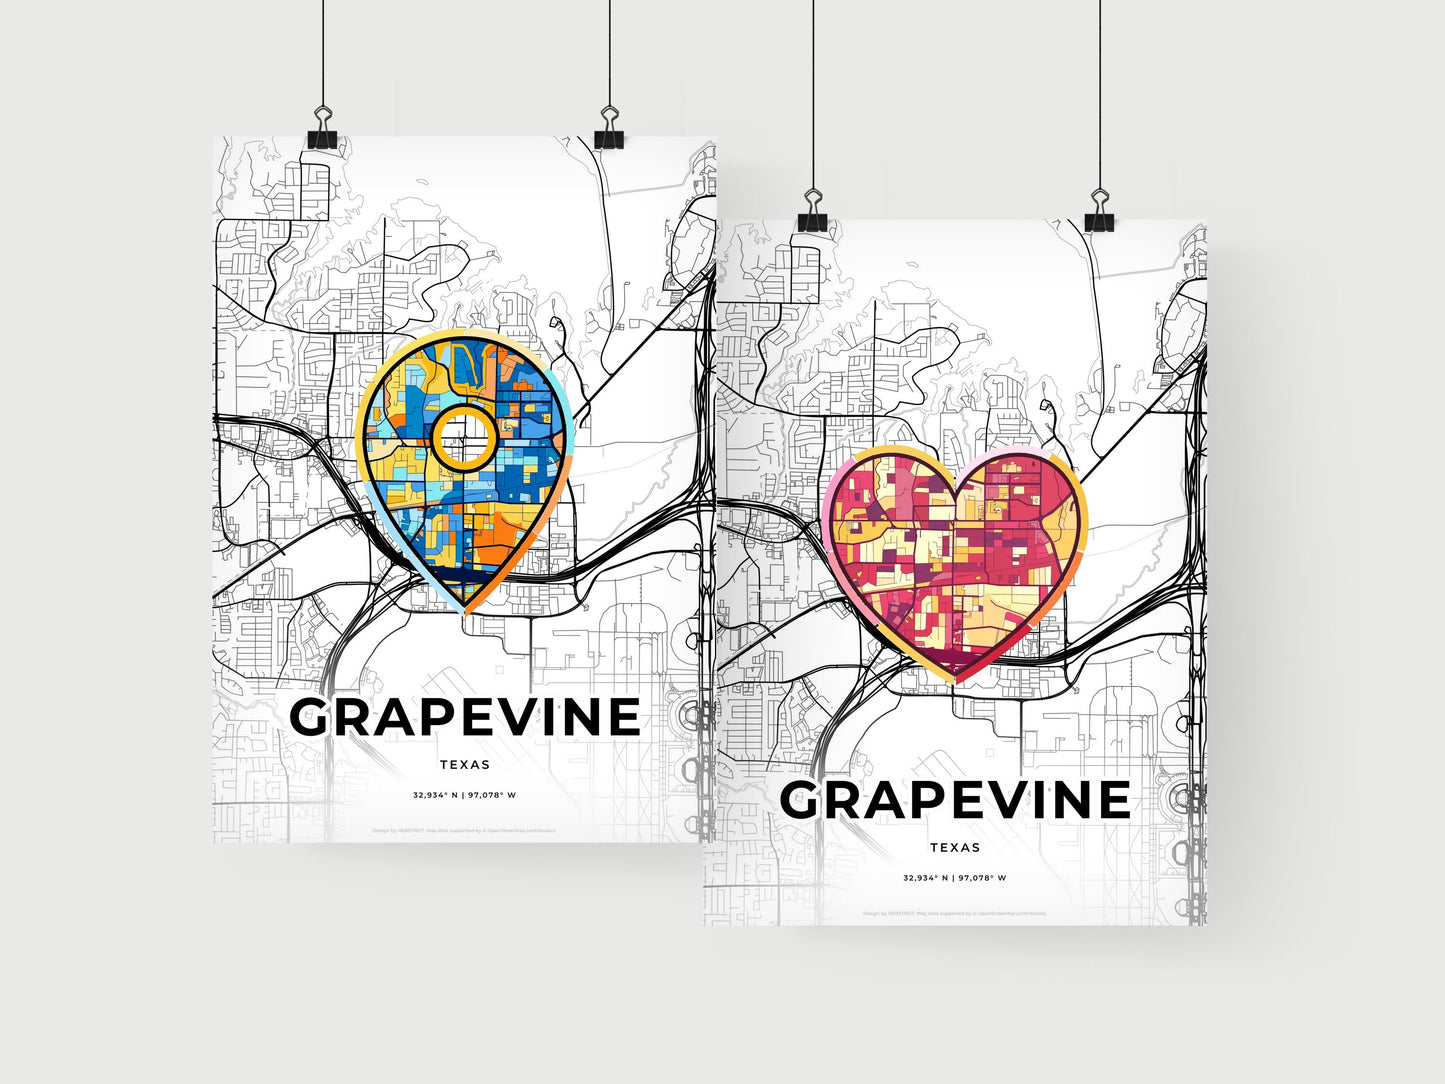 GRAPEVINE TEXAS minimal art map with a colorful icon. Where it all began, Couple map gift.